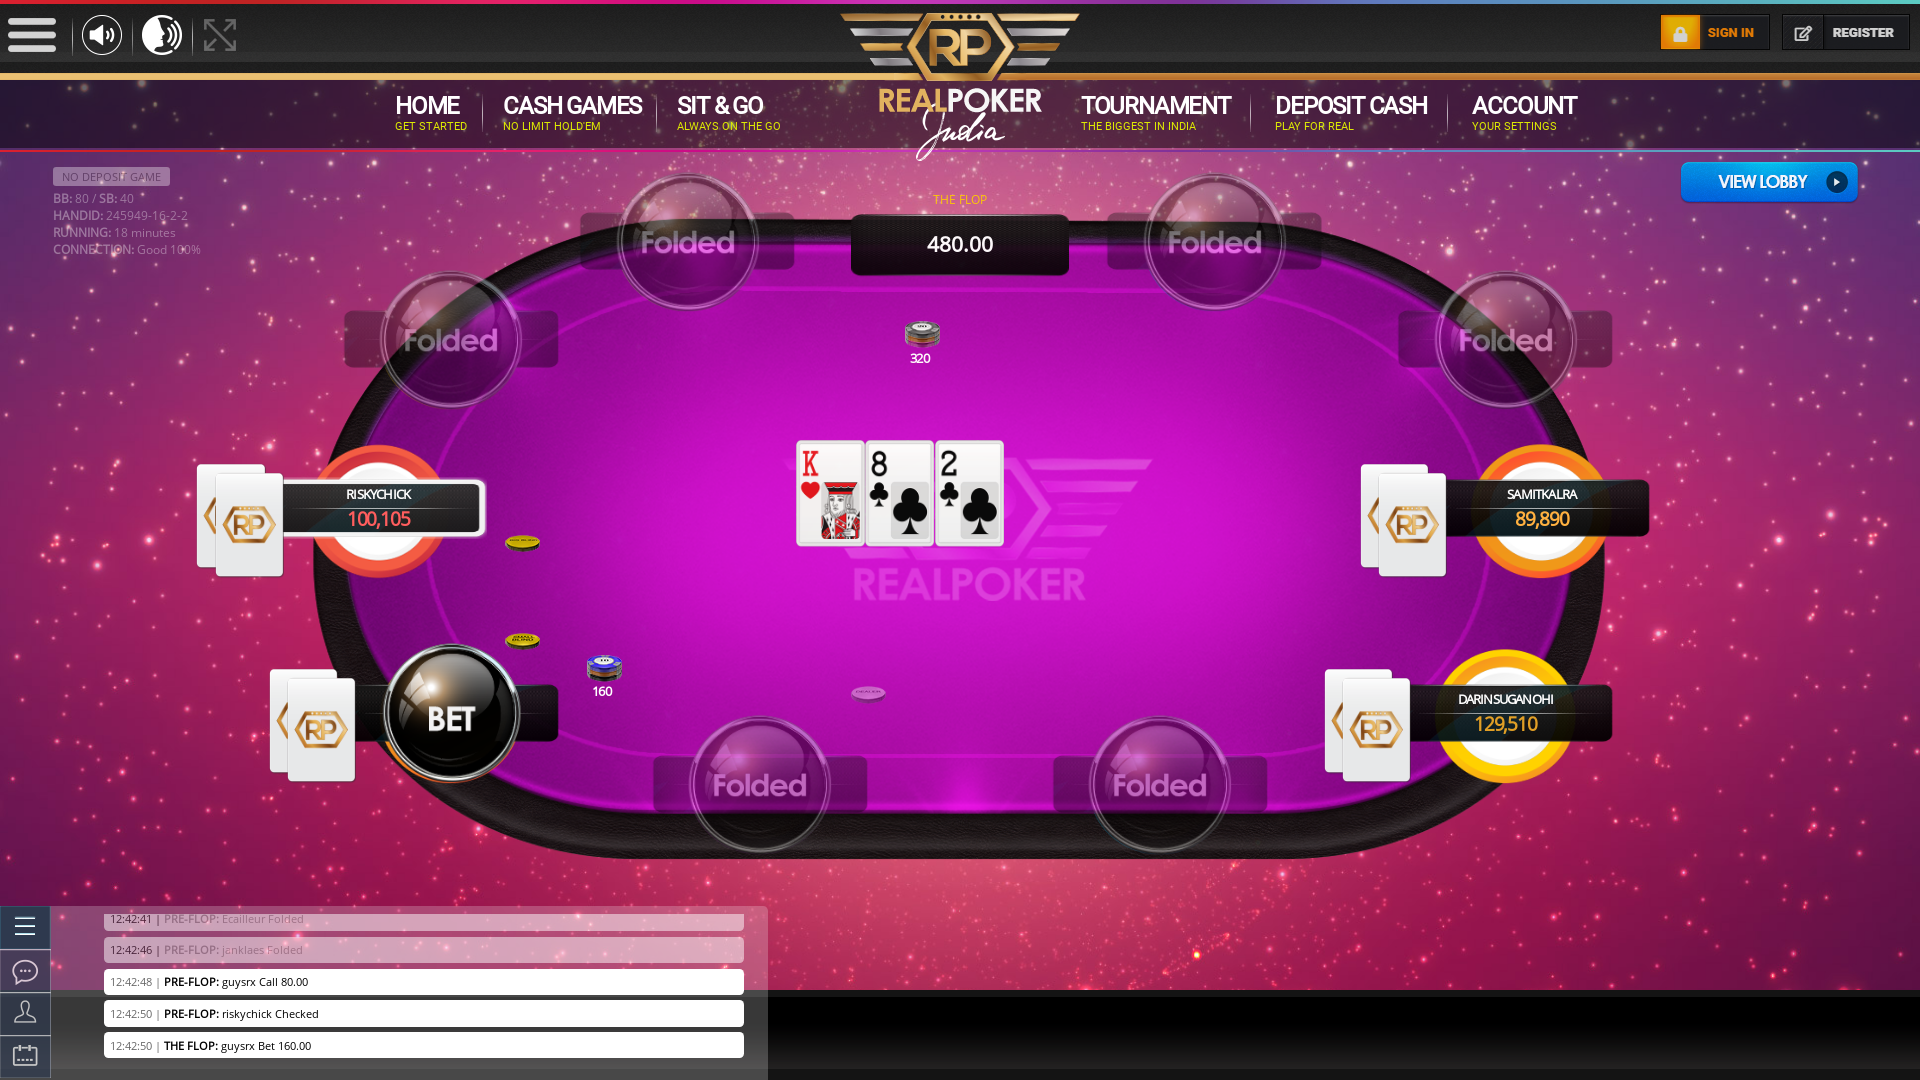 Quepem Goa poker table on a 10 player table in the 17th minute of the match